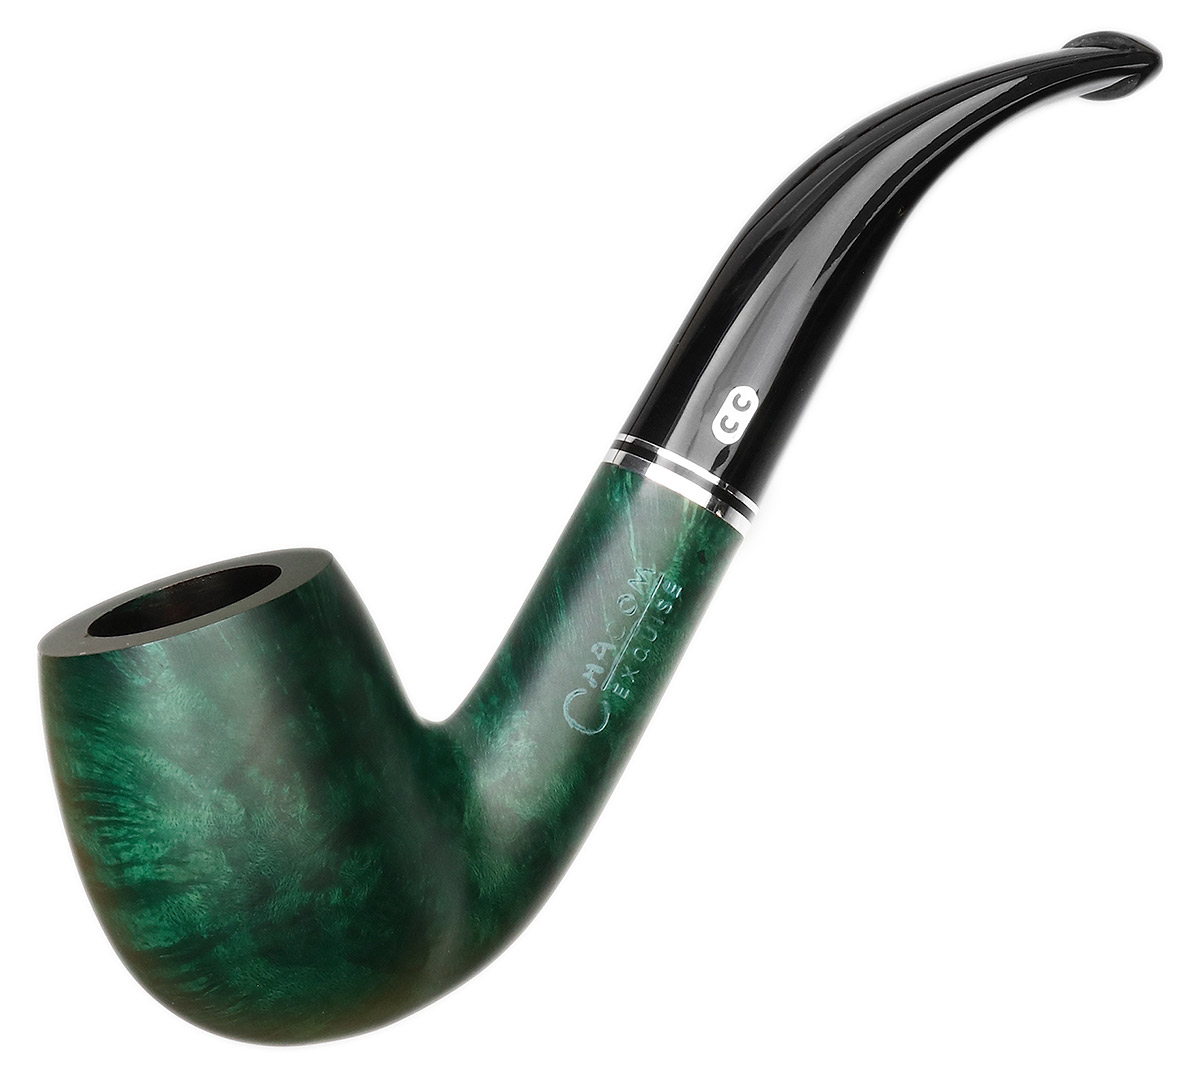 Chacom Exquise Smooth Matte Bent Billiard